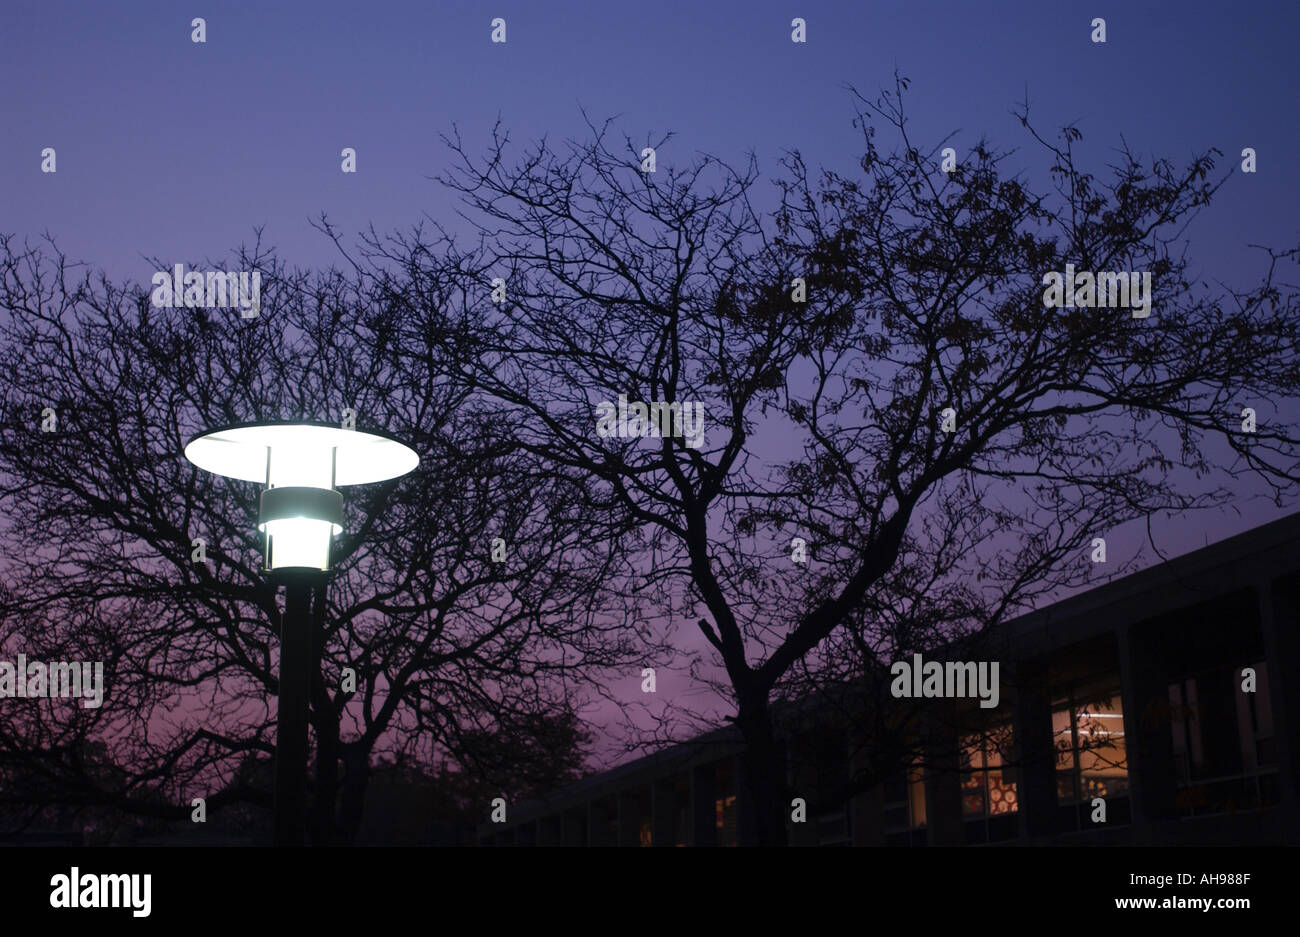 Lamp and tree outside an office complex Late at night  Stock Photo